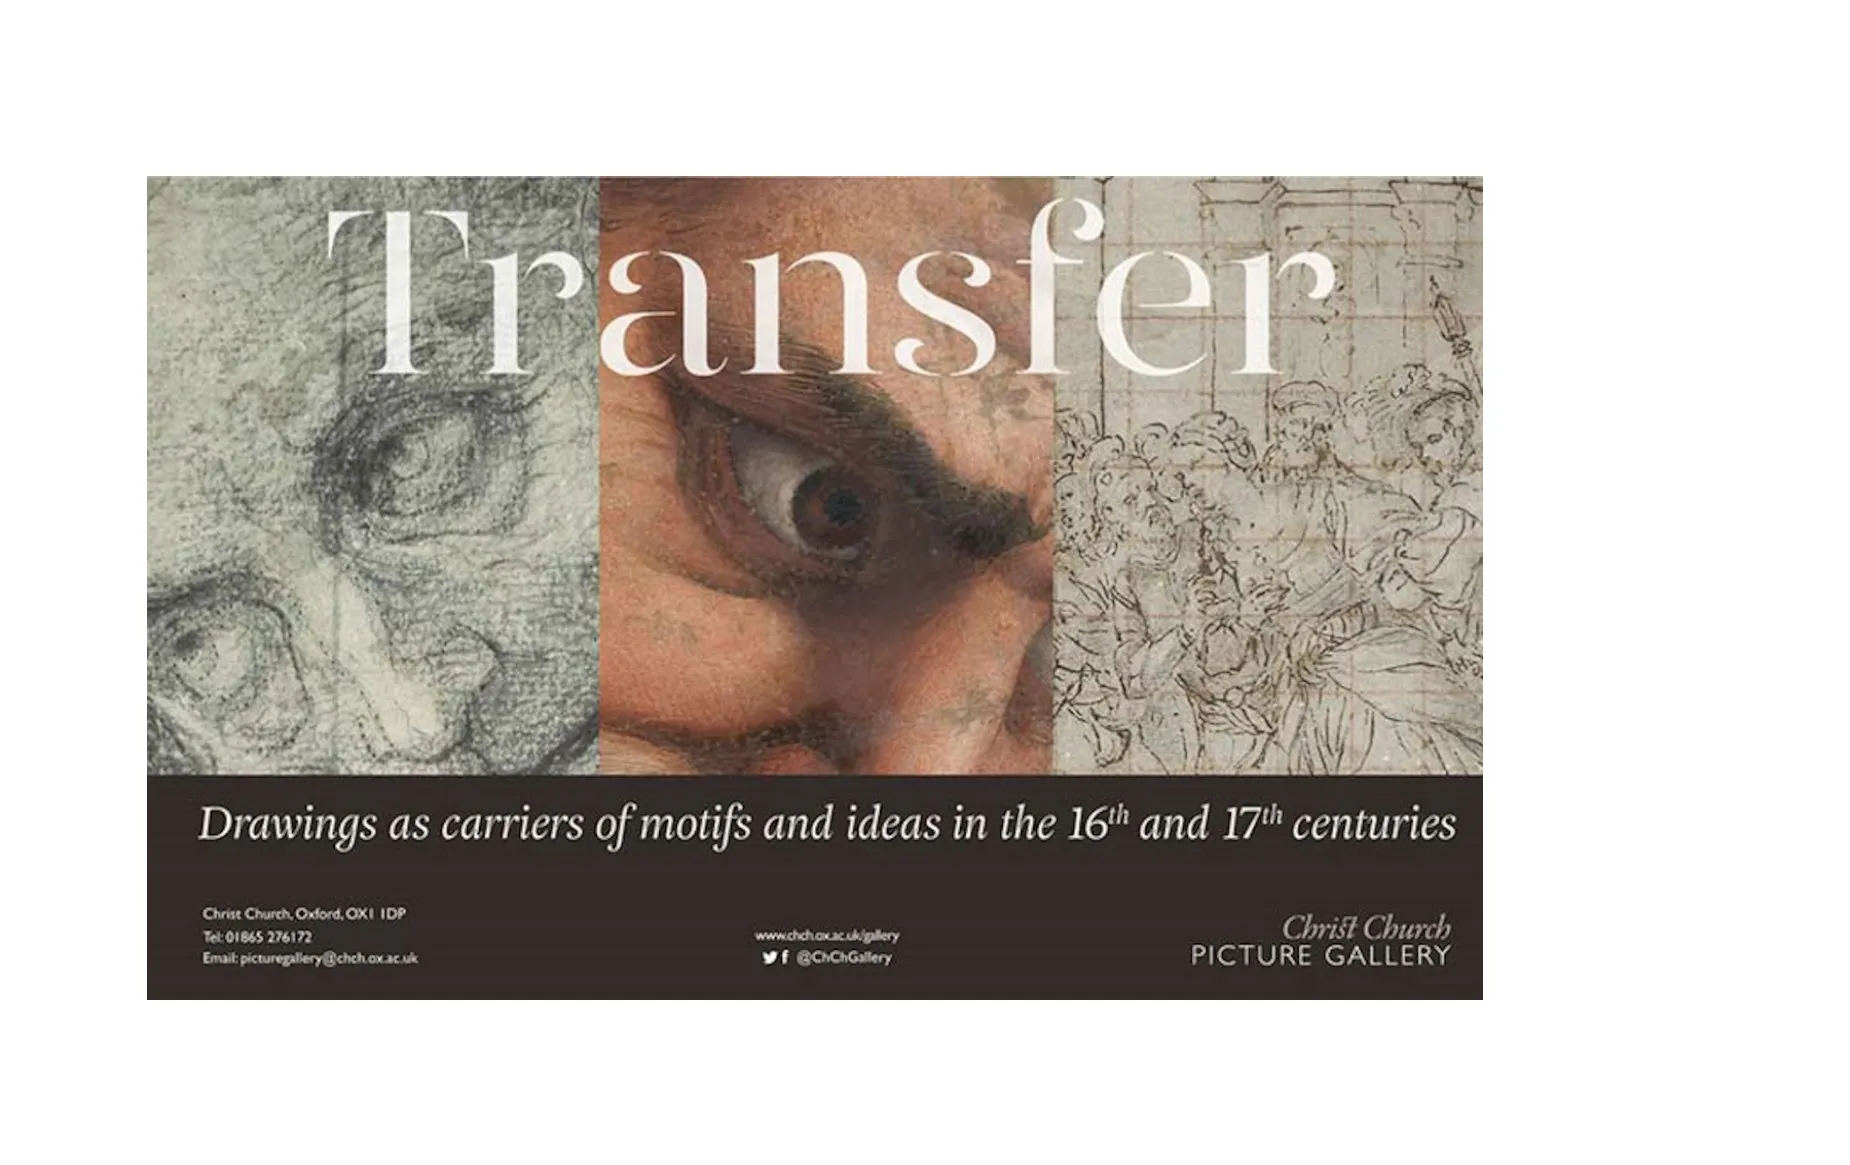 Exhibition poster from 'Transfer: Drawings as carriers of motifs and ideas in the 16th and 17th centuries'